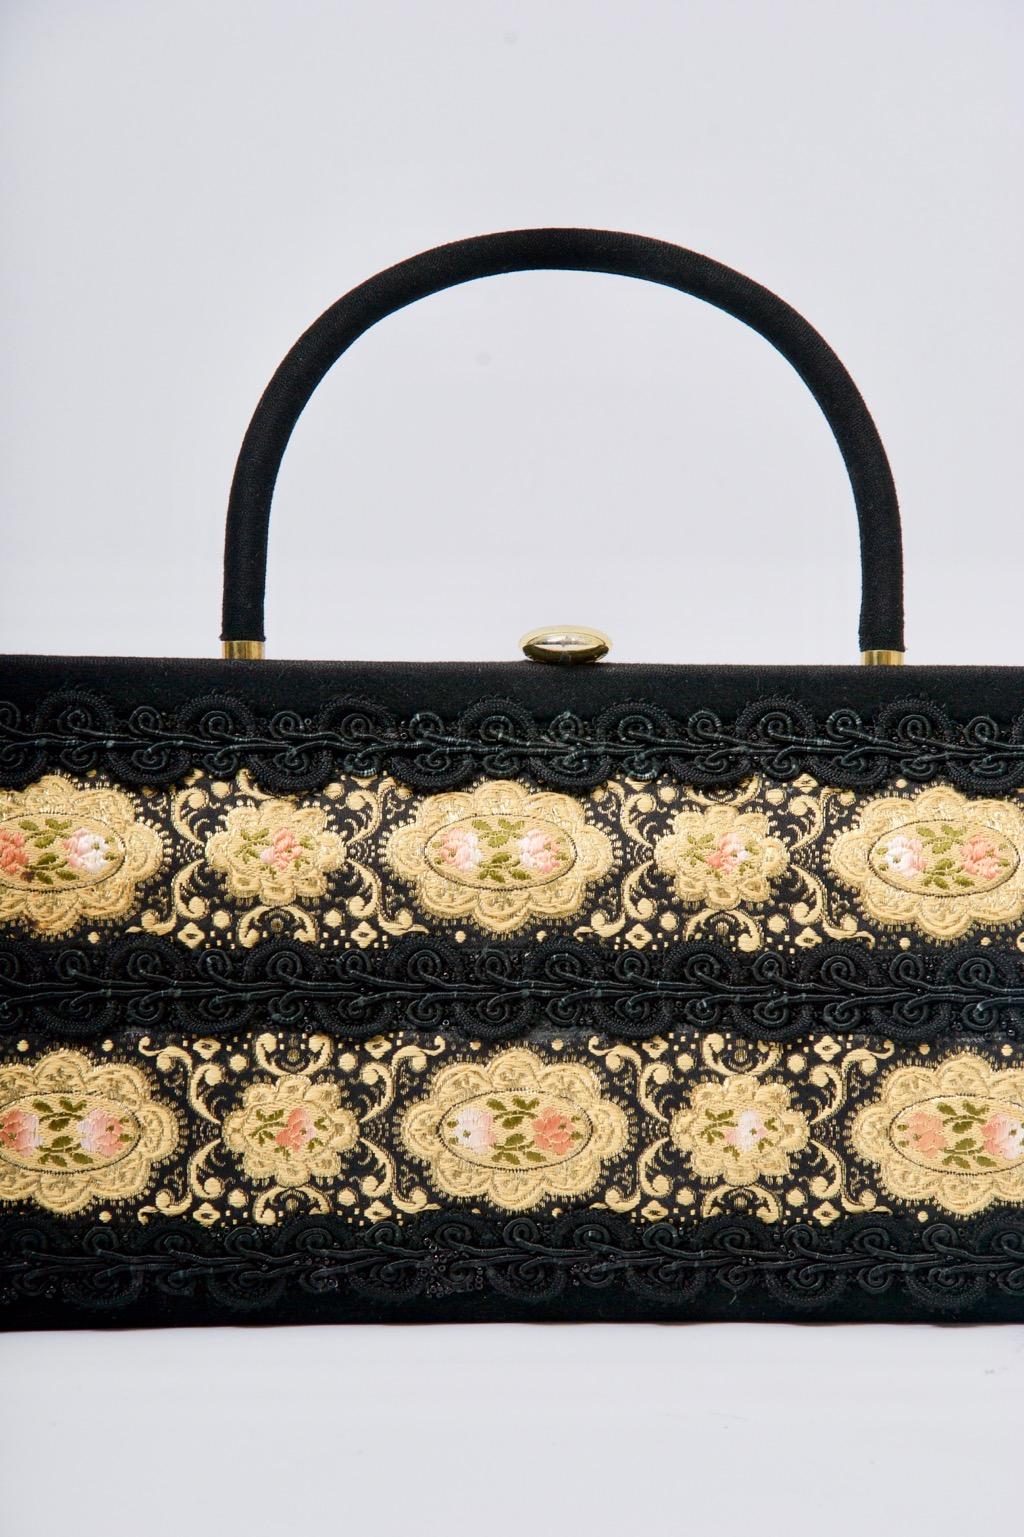 1960s elongated handbag of soft black fabric embellished on front with a double row of ribbon trim bound edged with black soutache. Single structured handle and gold disk clasp. Caron of Houston was known for its hand decorated handbags, very